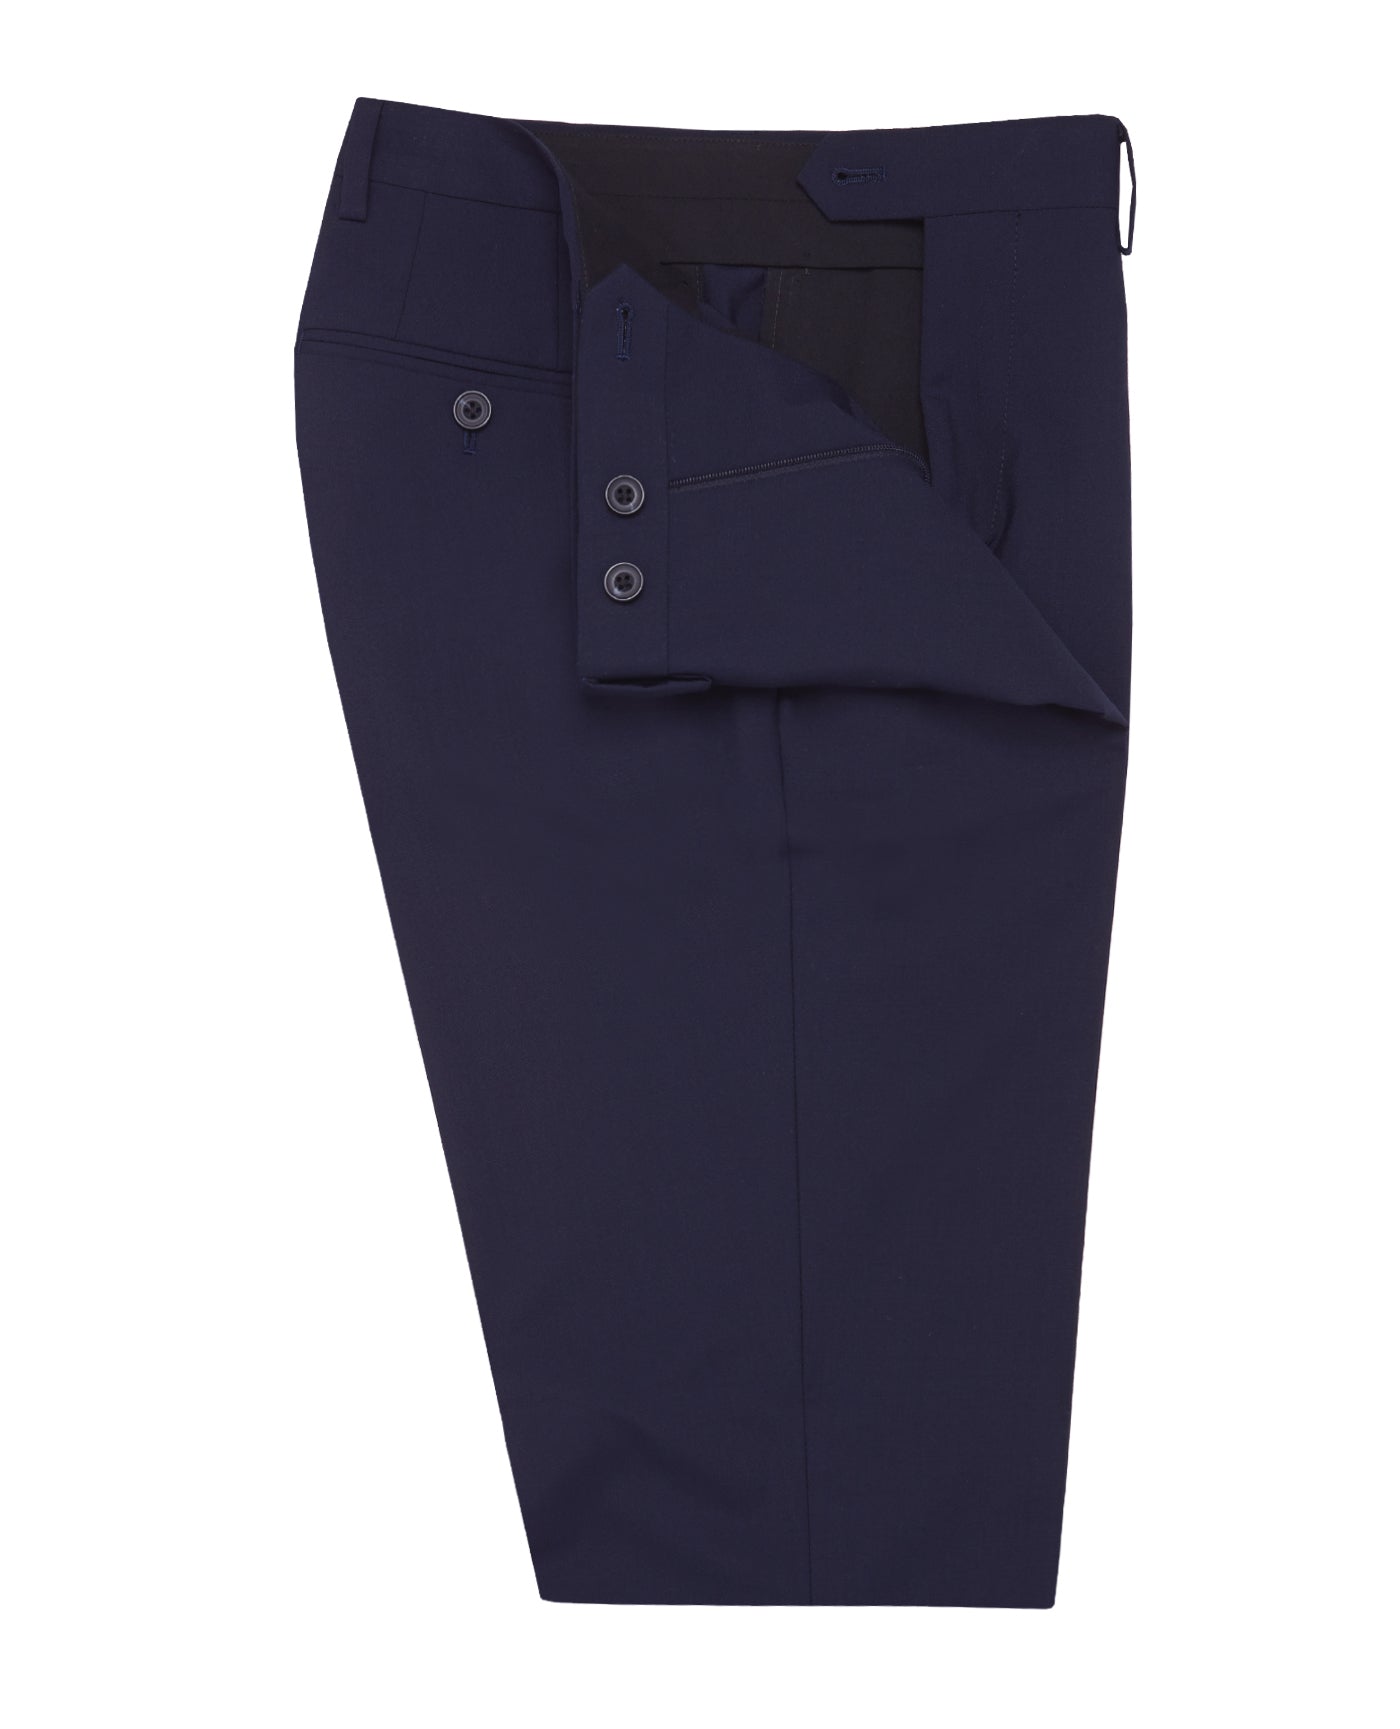 Image 1 of Jackman Skinny Fit Navy Trousers